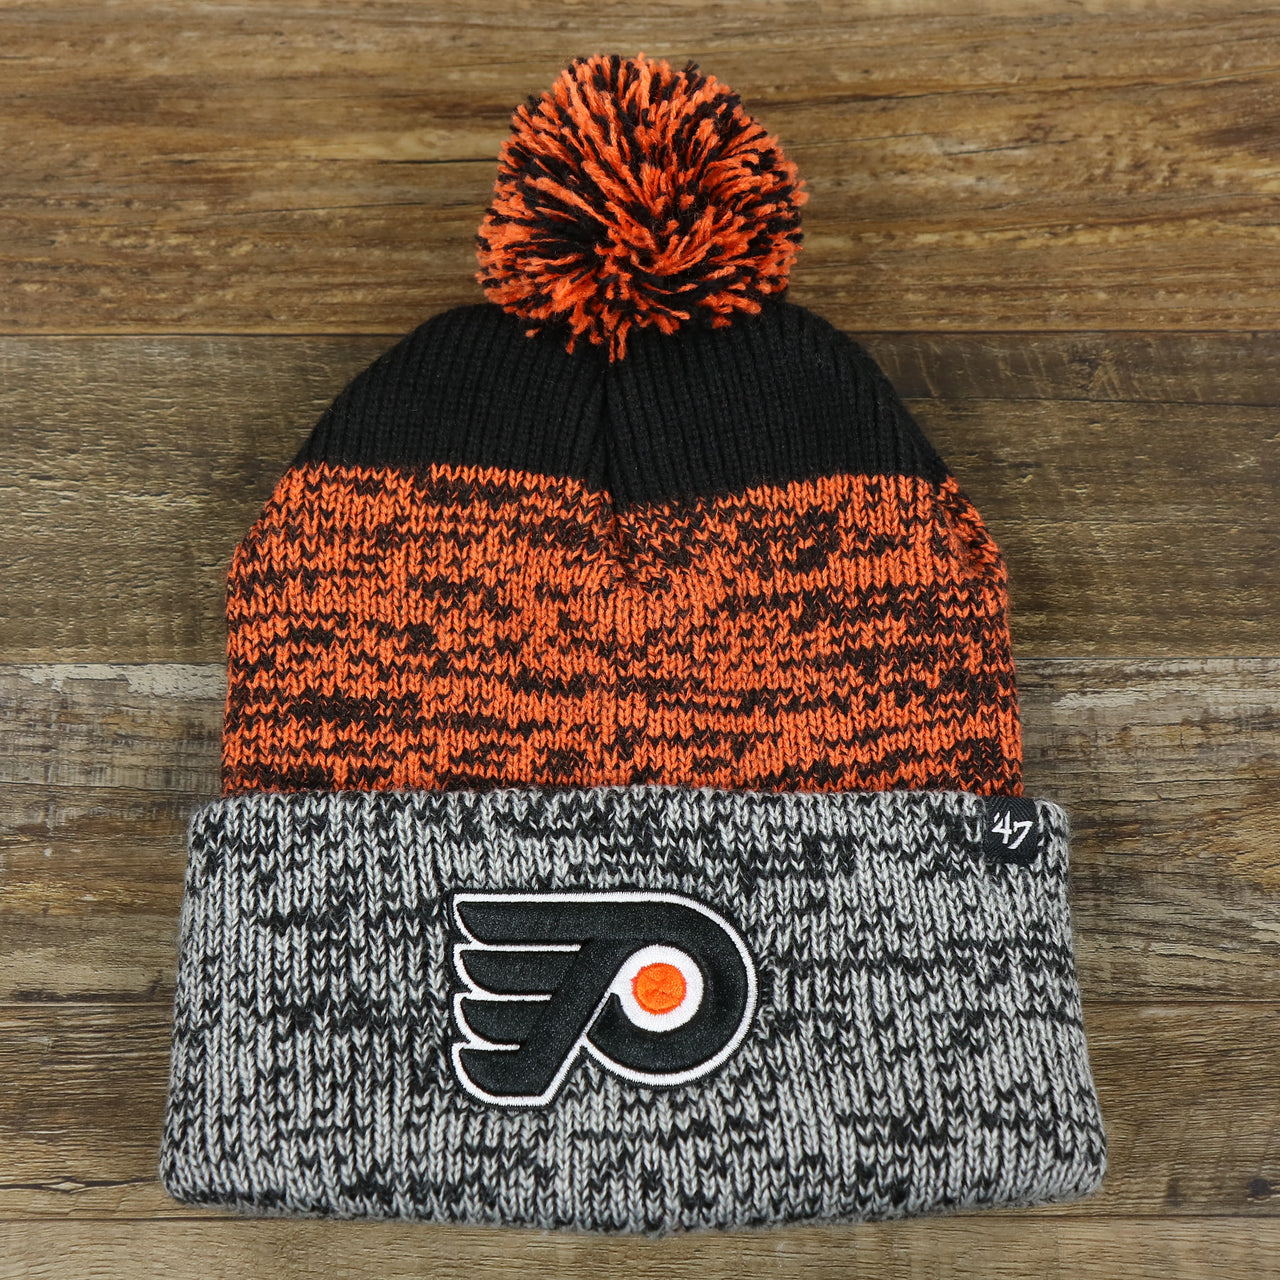 The front of the Philadelphia Flyers Static Knit Cuffed Winter Beanie With Pom Pom | Black, Orange, And Gray Beanie